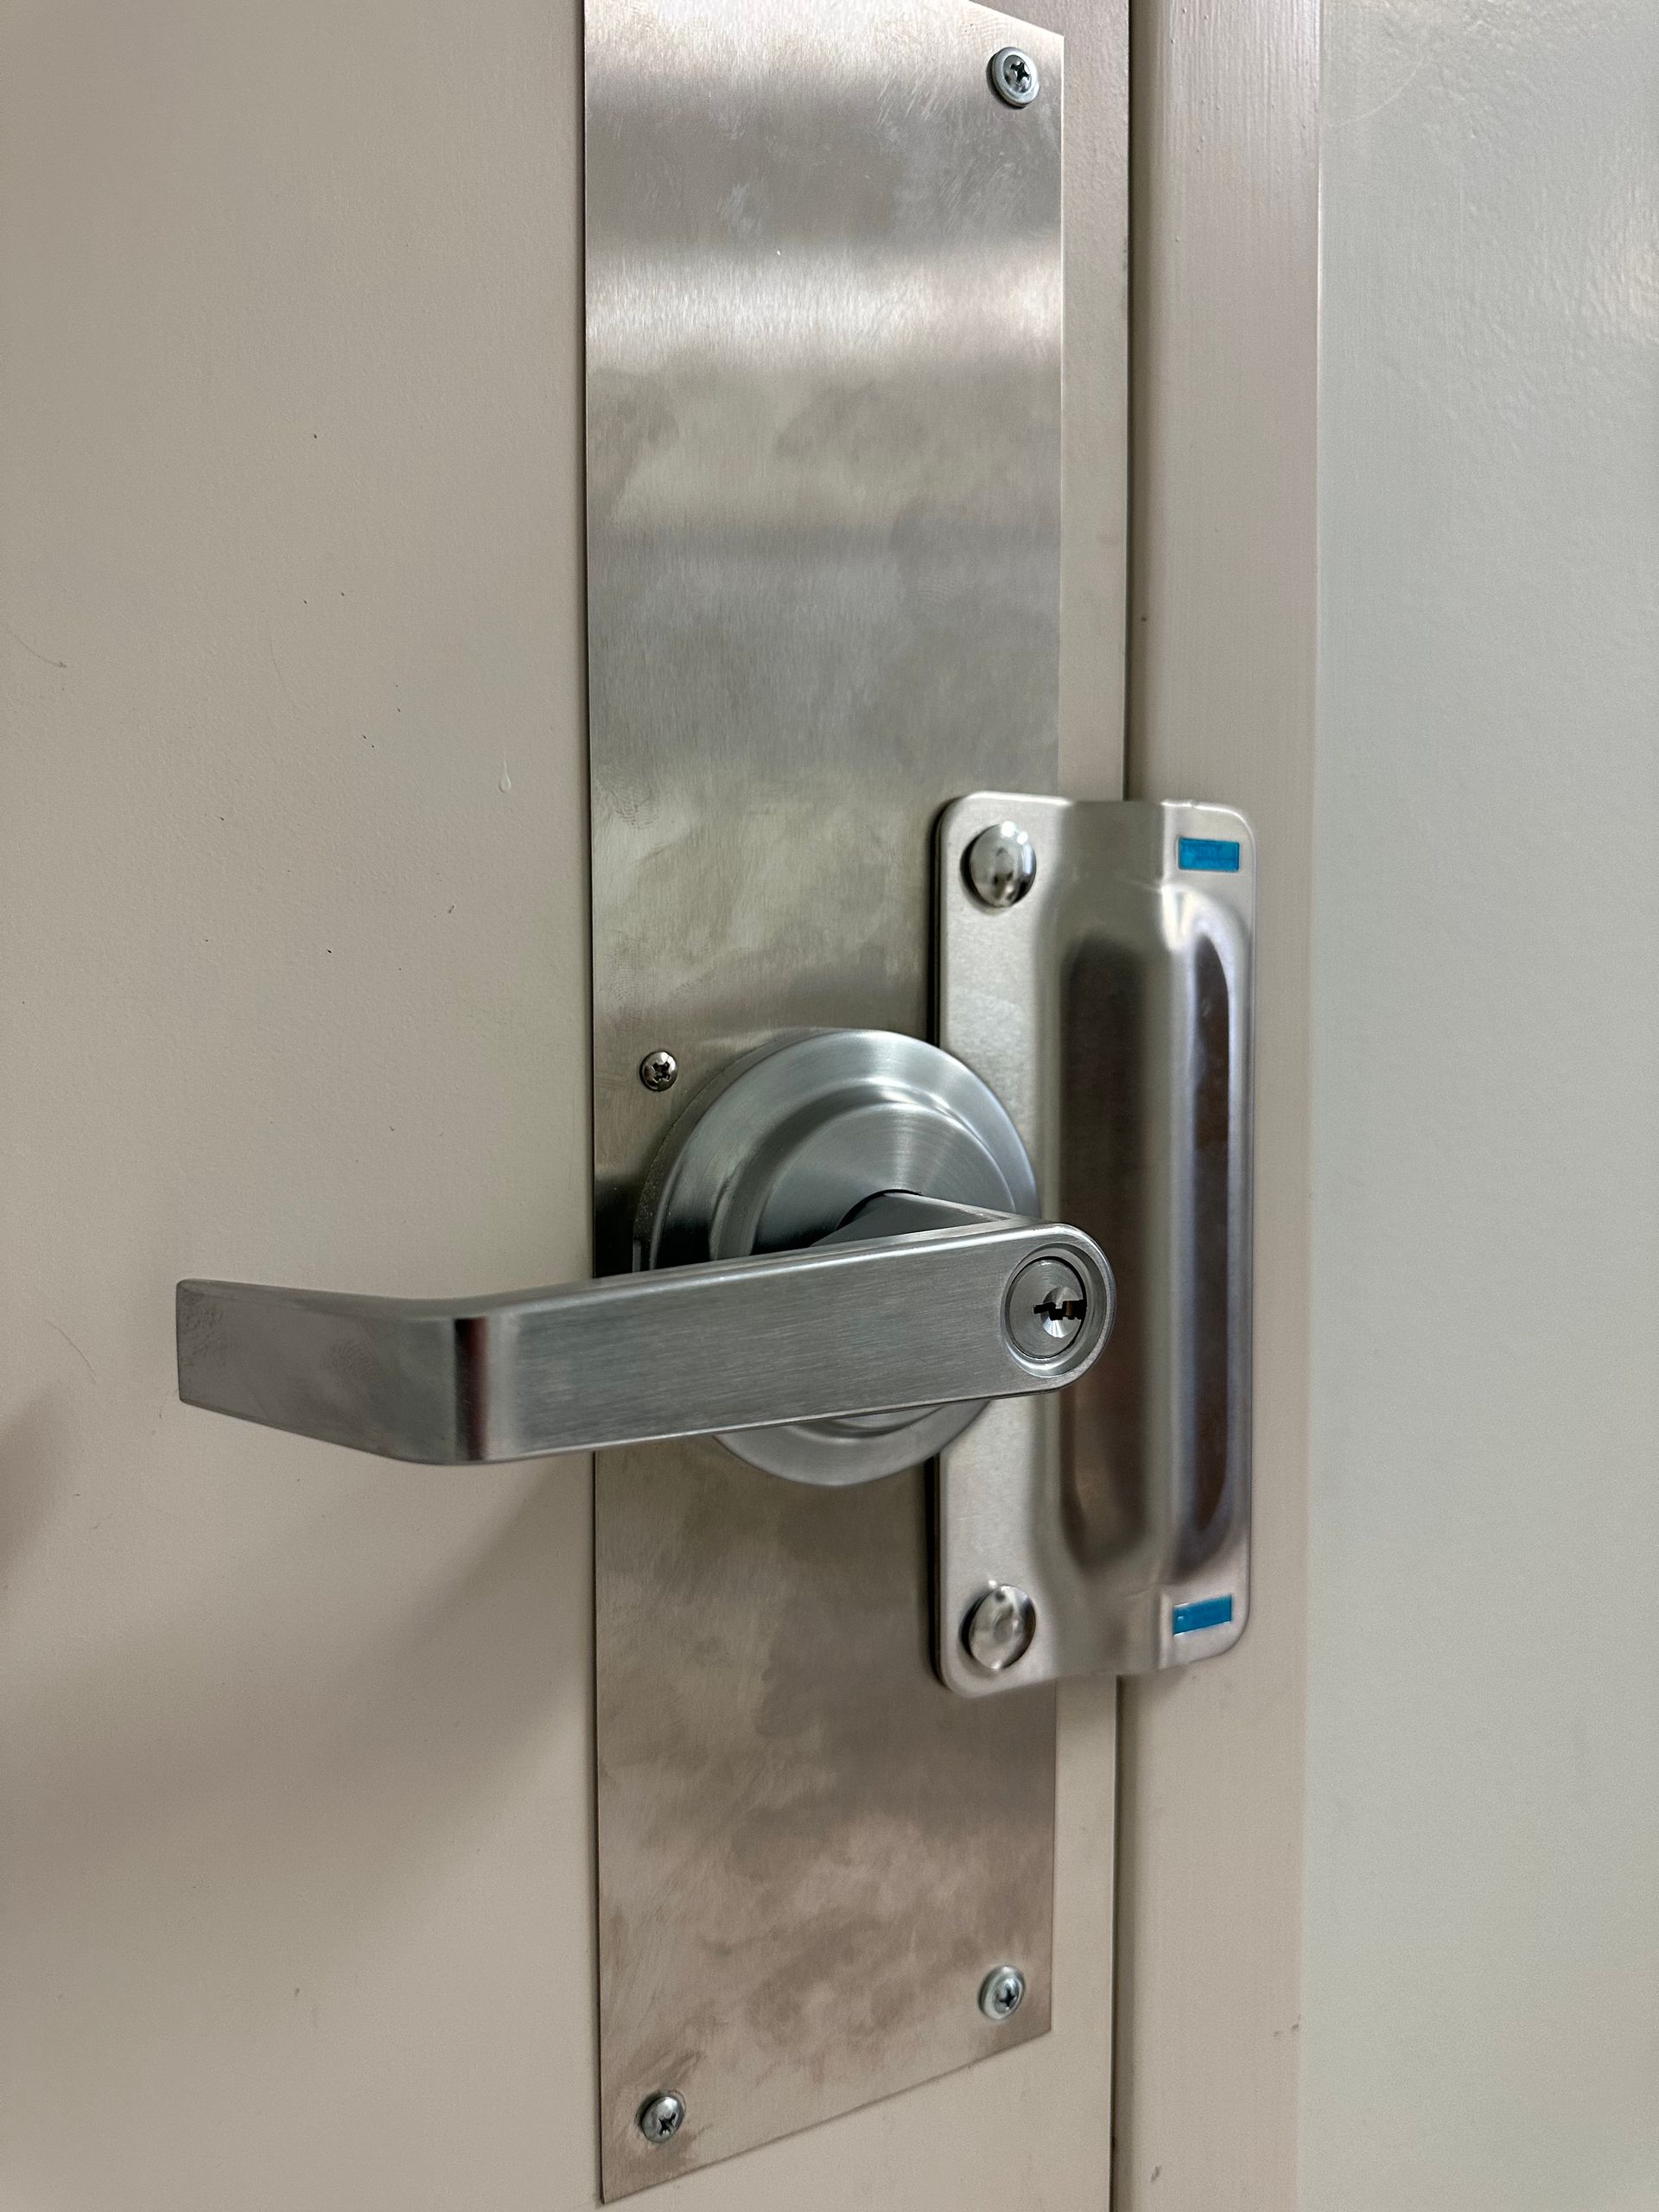 A door bolstered with a heavy duty commercial grade lock and latch protector.